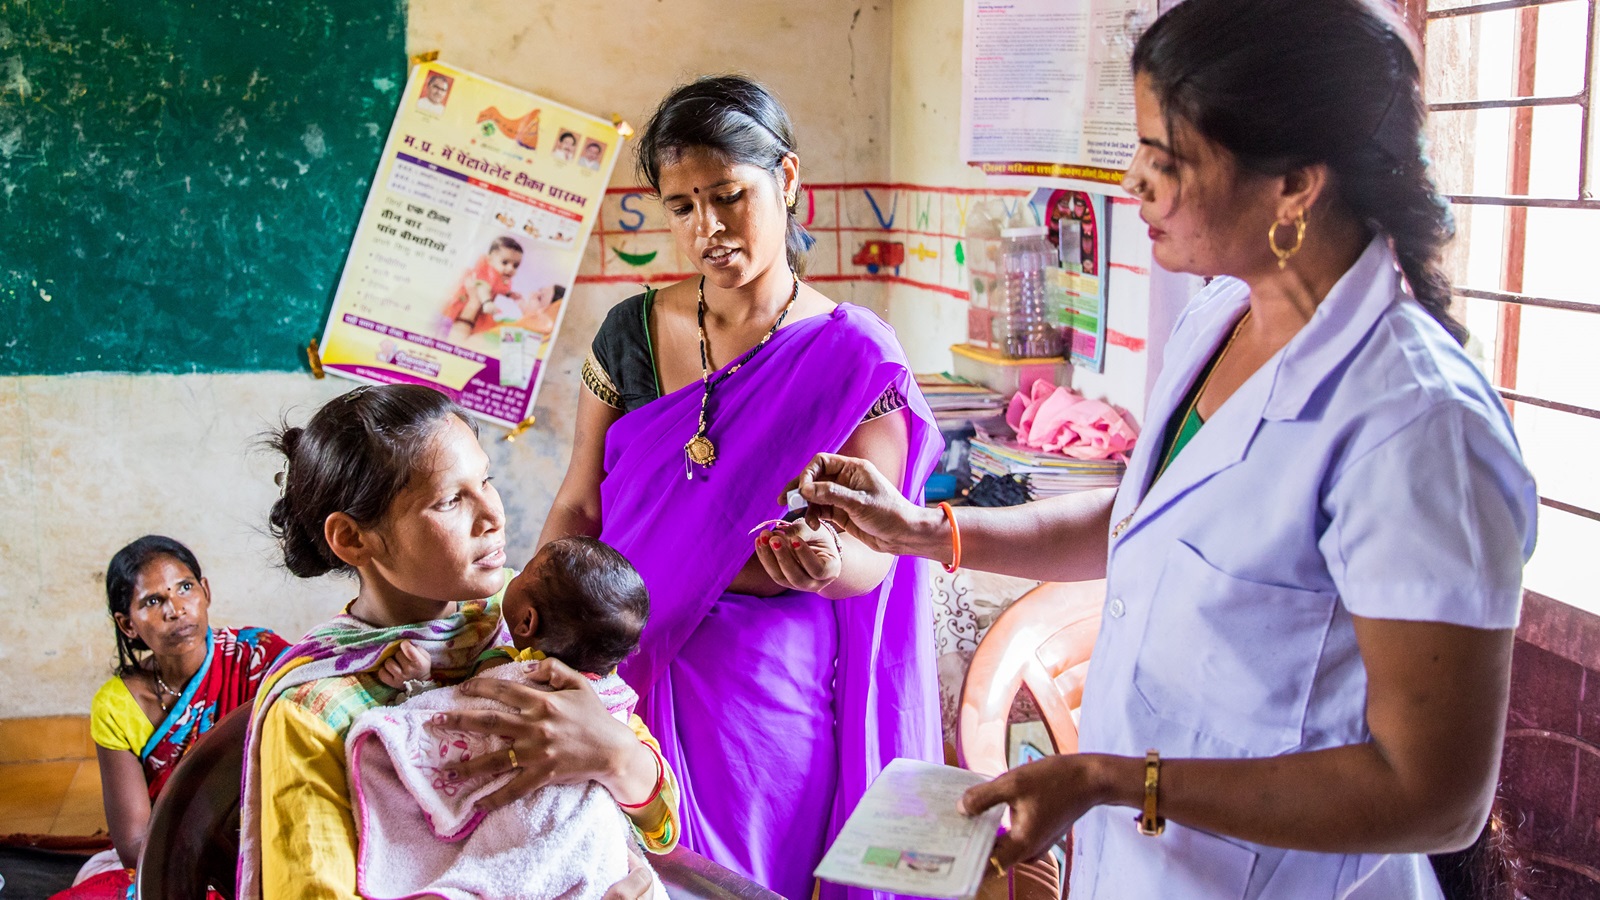 An Auxiliary Nurse Midwife (ANM), explains the post care of the vaccinations given to a mother and child at an Anganwadi Centre (AWC) in Bhopal, Madhya Pradesh, India